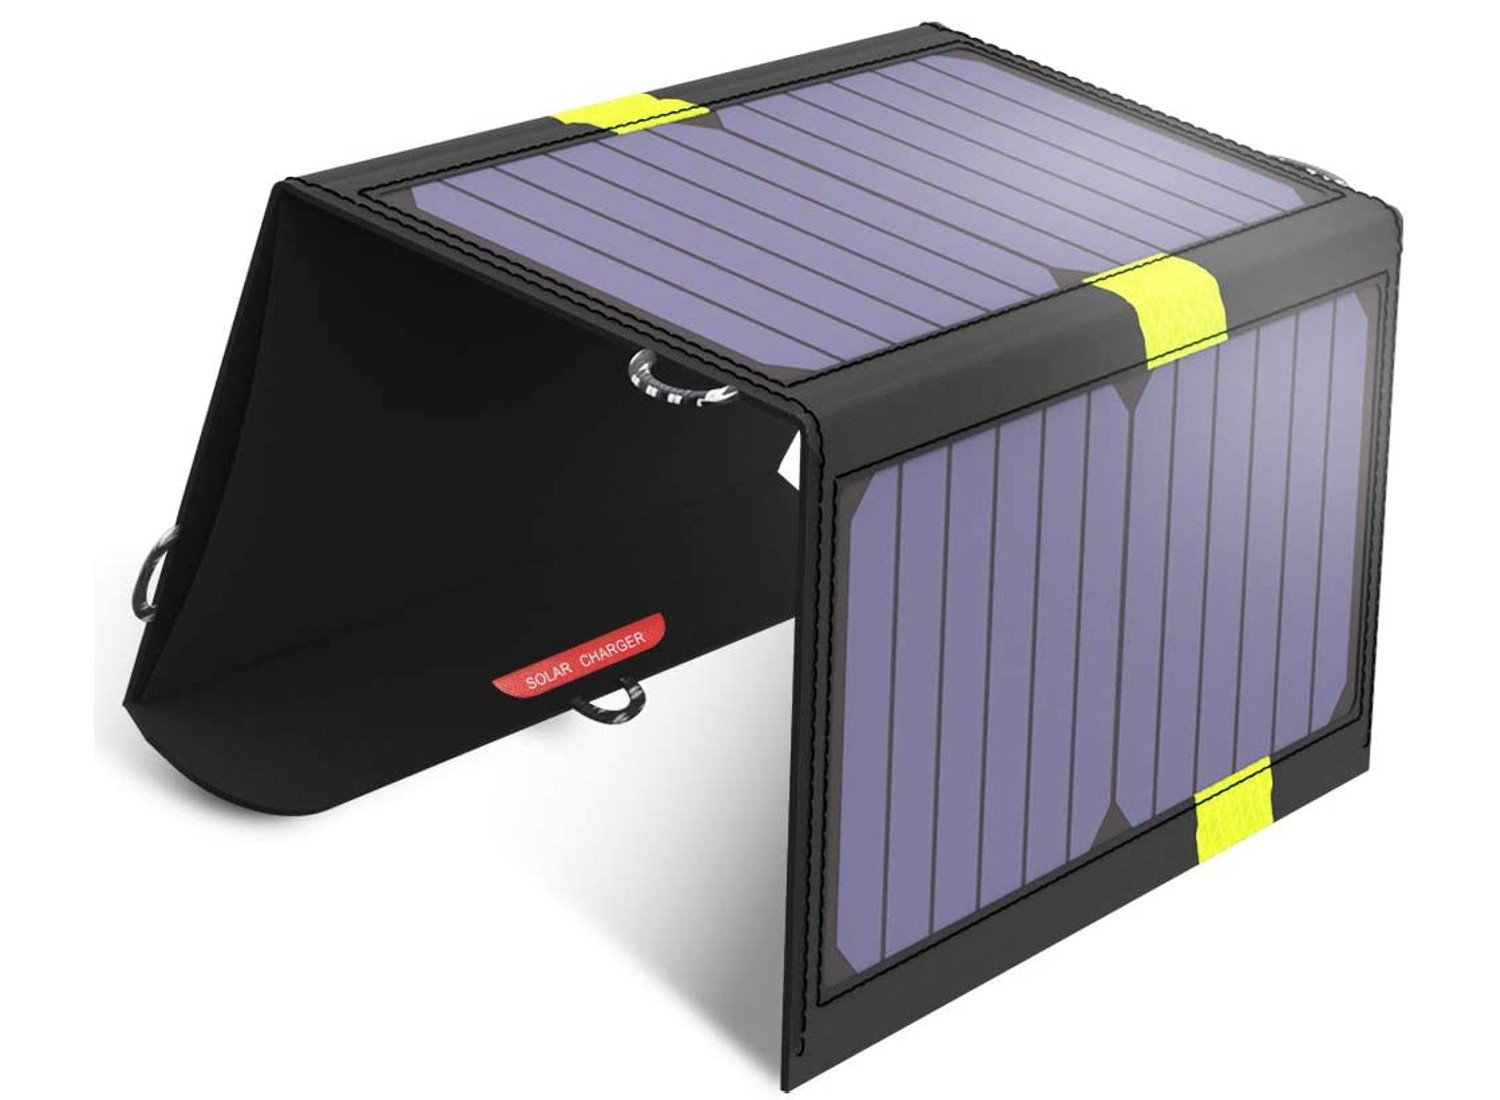 solar powered phone charger reviews